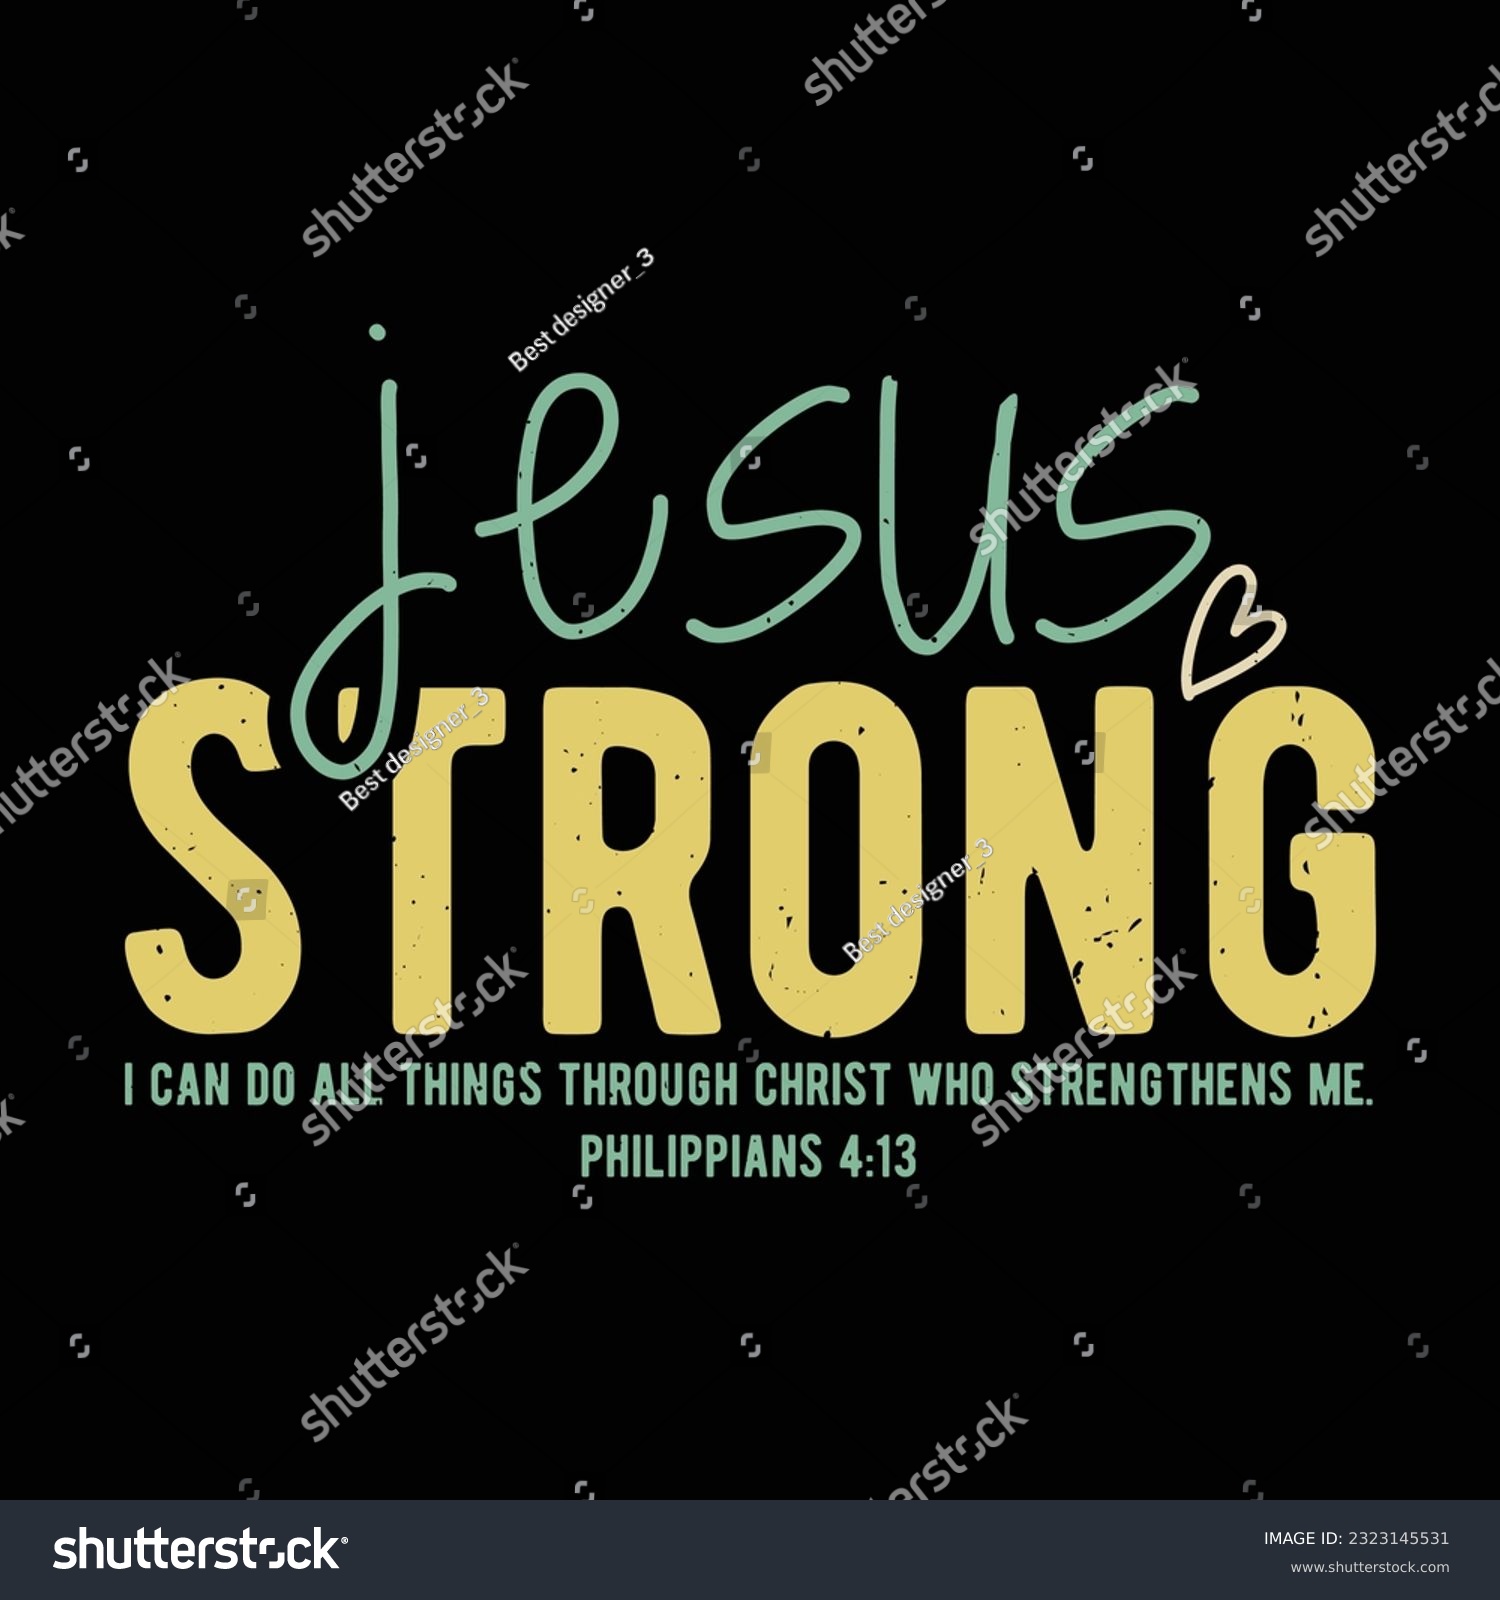 SVG of jesus strong i can do all things through christ who strengthens me.philippians 4:13 svg